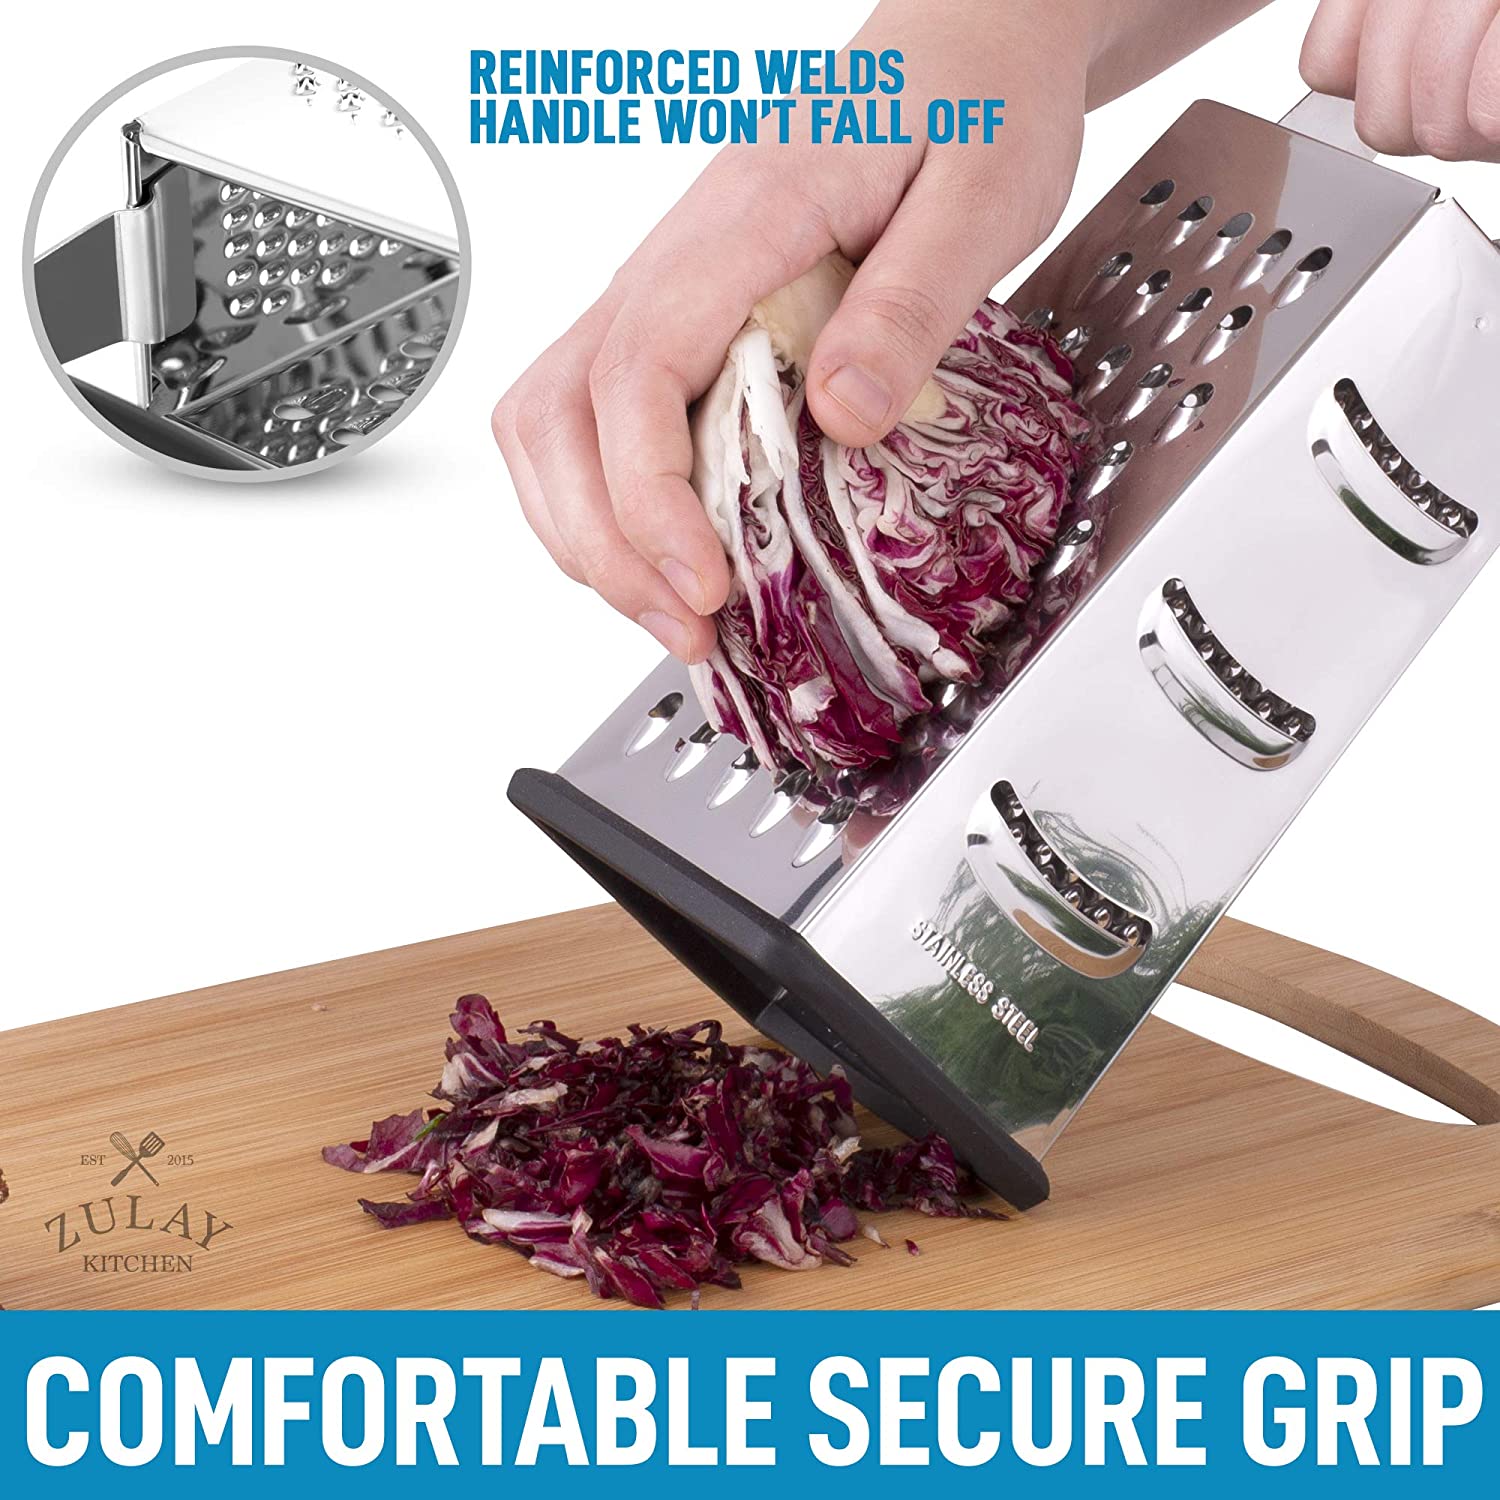 The Best Cheese Grater Will Save Your Tiny Kitchen